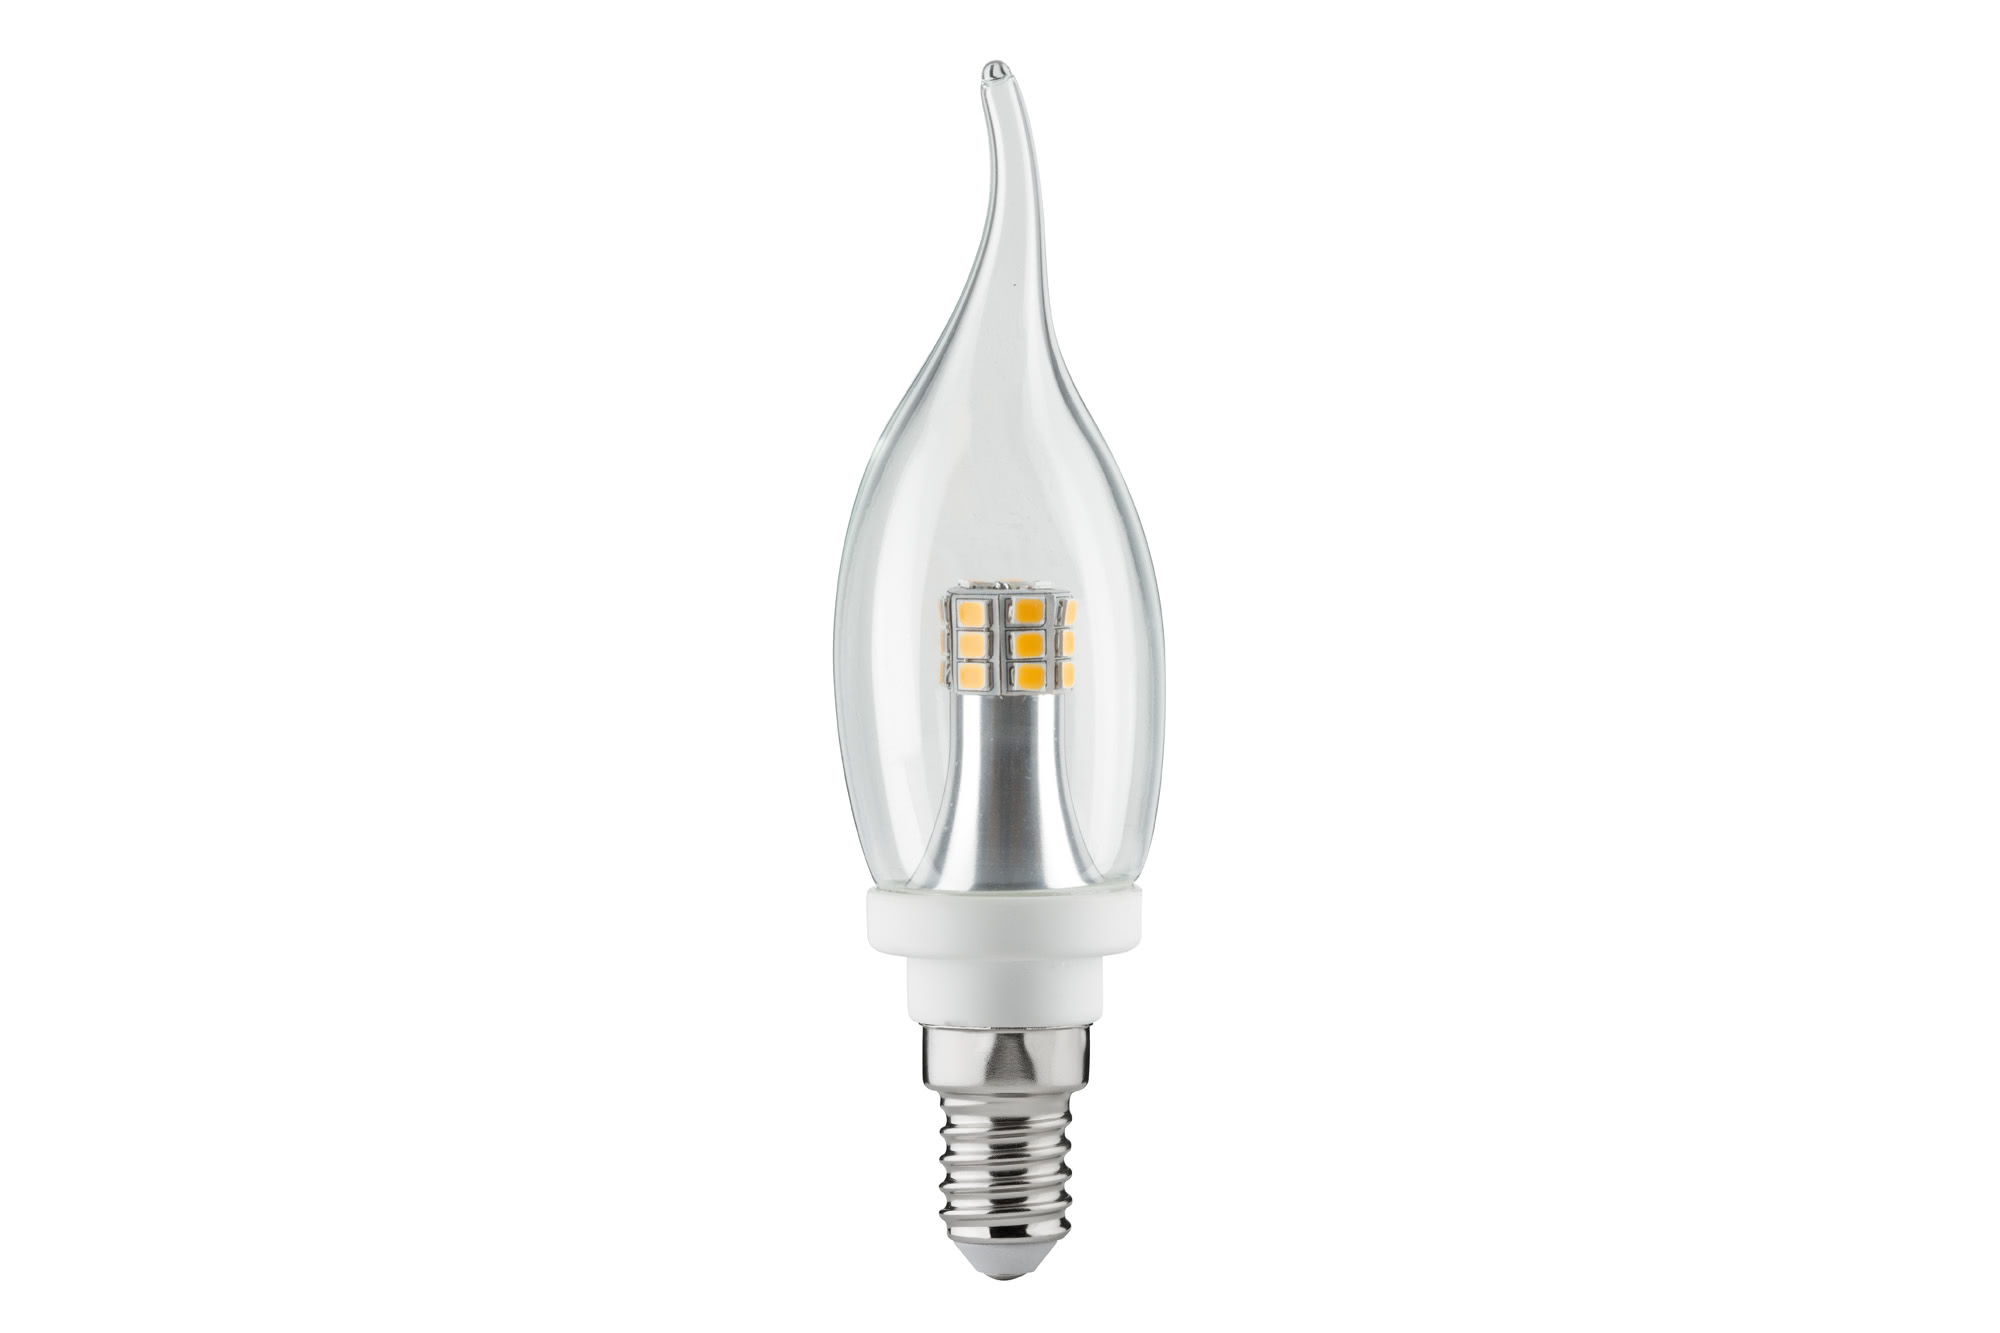 28306 LED Kerze Cosylight 4W E14 Klar 2700K Candle bulbs for use with chandeliers, ceiling and wall lamps. 283.06 Paulmann